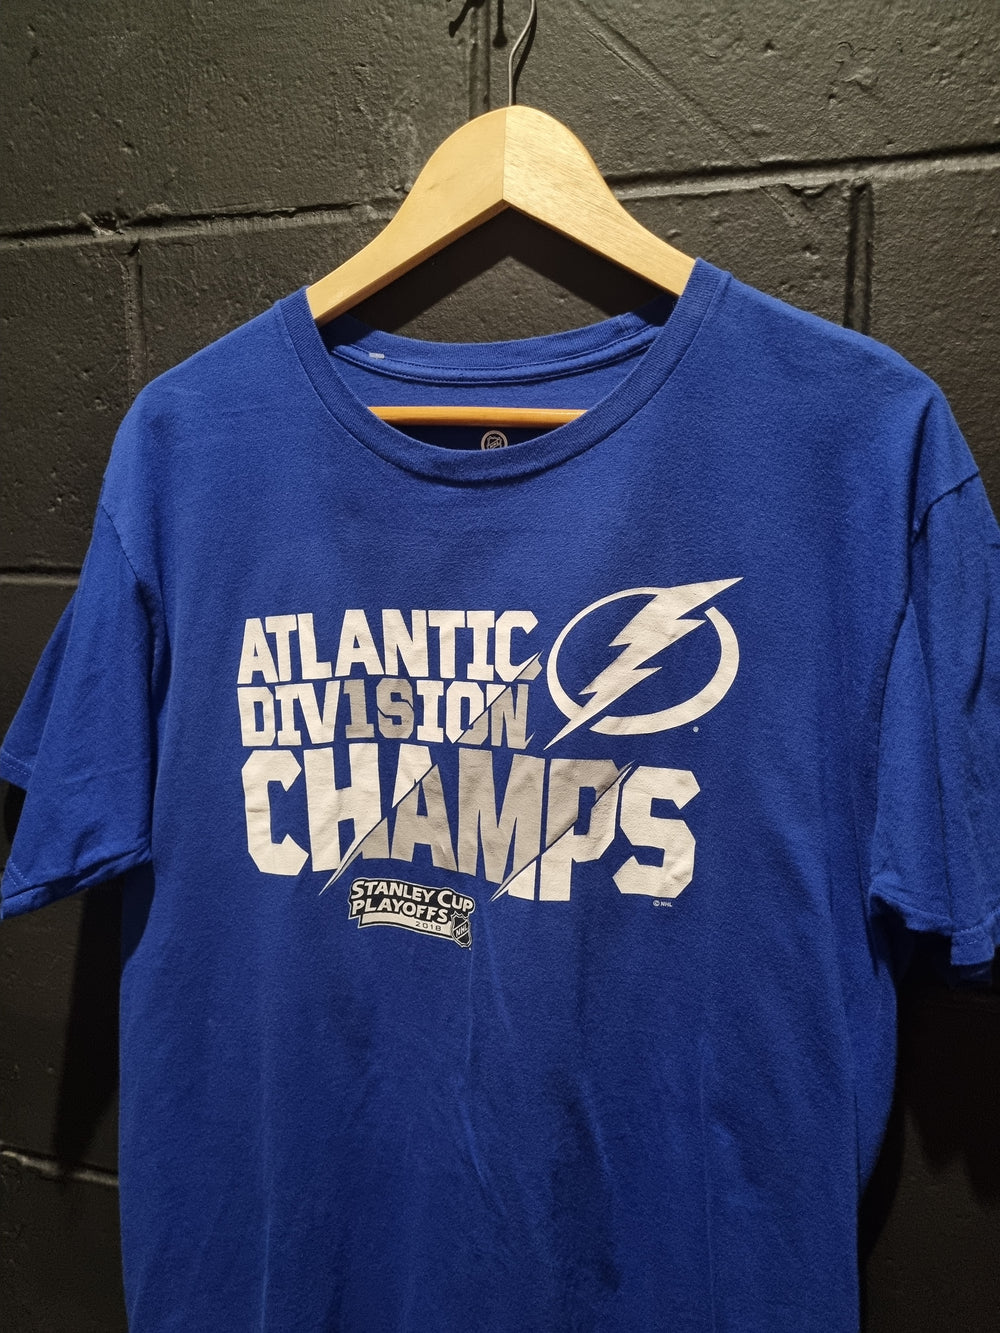 Atlantic Division Champs Stanley Cup Playoffs 2018 Large